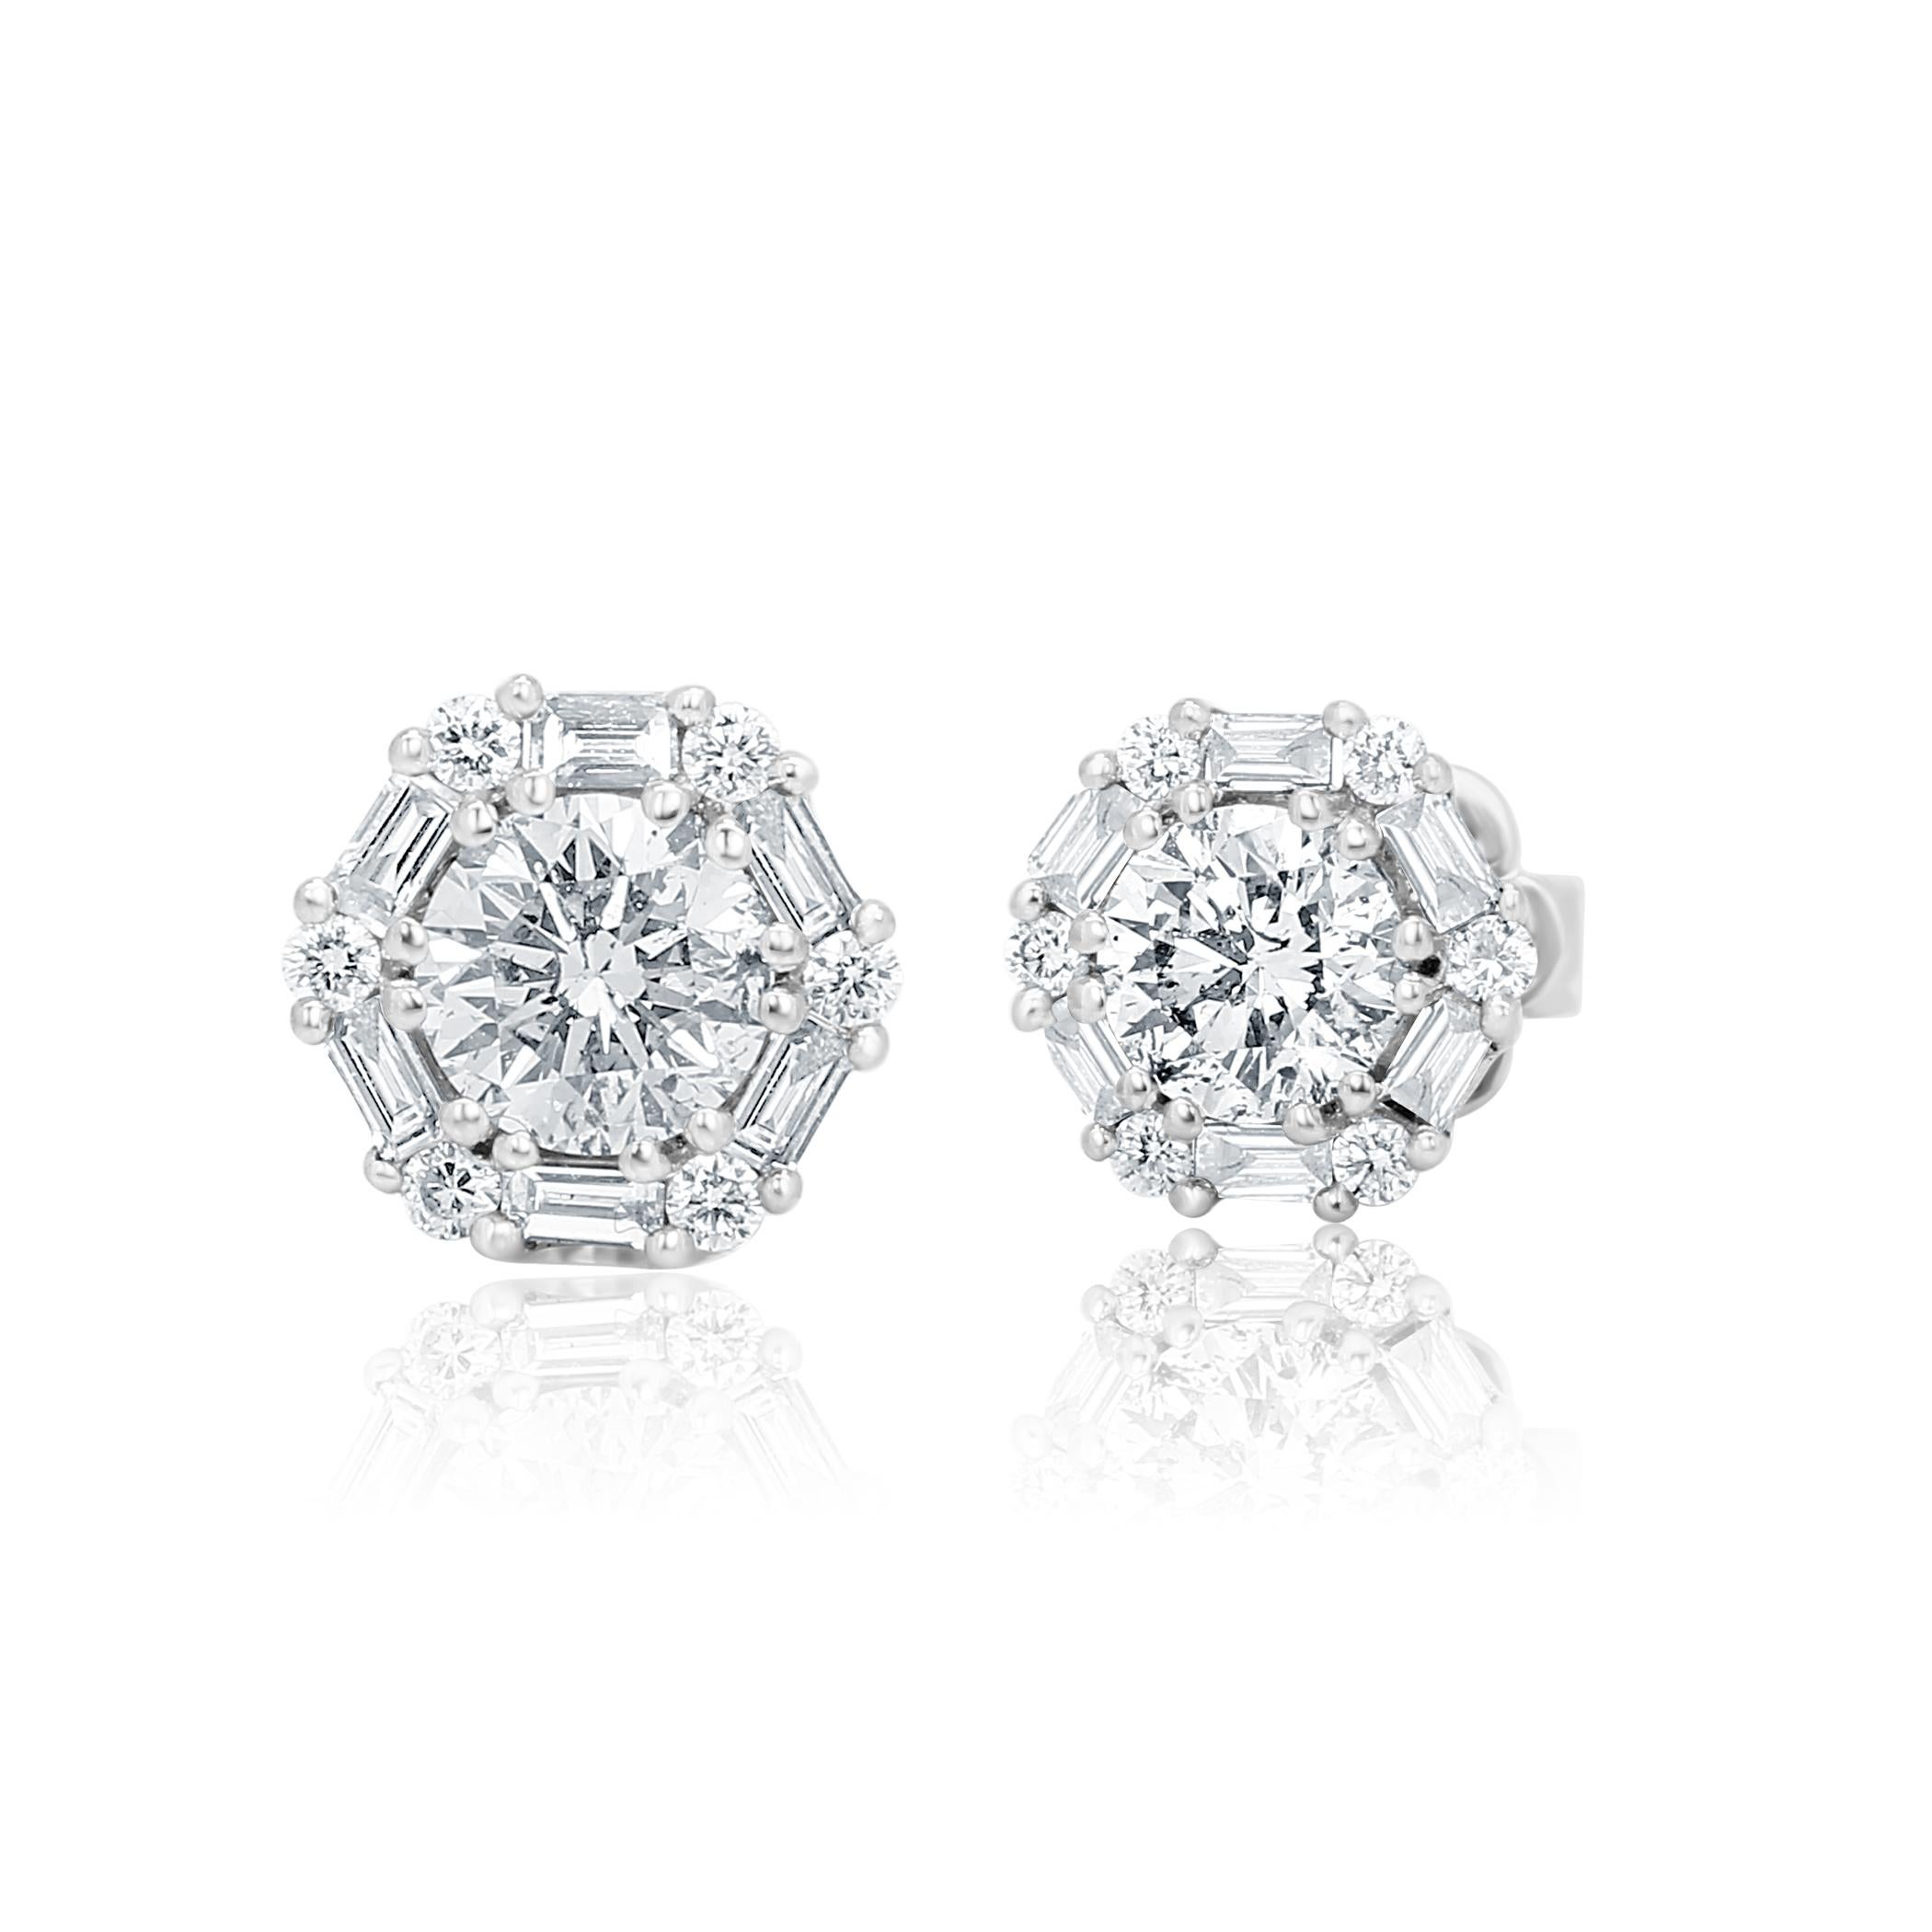 Stunning 2 White Colorless Diamonds Rounds SI-I Clarity 1.09 Carat Encircled in a single halo of 12 White Colorless Diamond Round    VS-SI Clarity 0.14 Carat and 12 White Colorless Baguette Diamond VS clarity 0.27 Carat Set in Gorgeous and Stylish